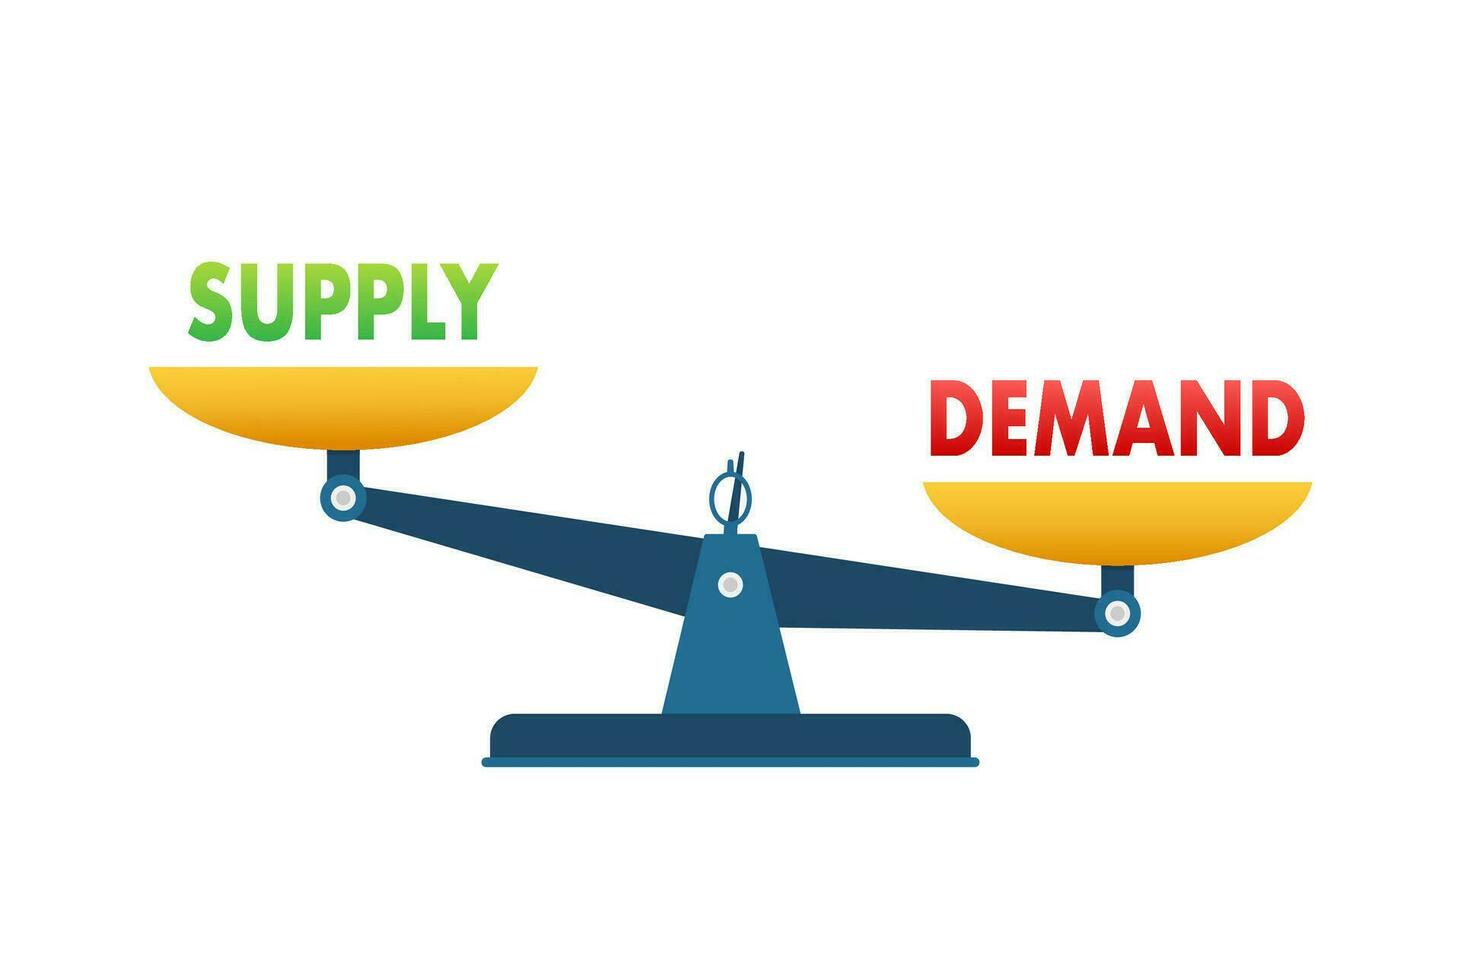 Demand and Supply balance on the scale. Business Concept. Vector stock illustration